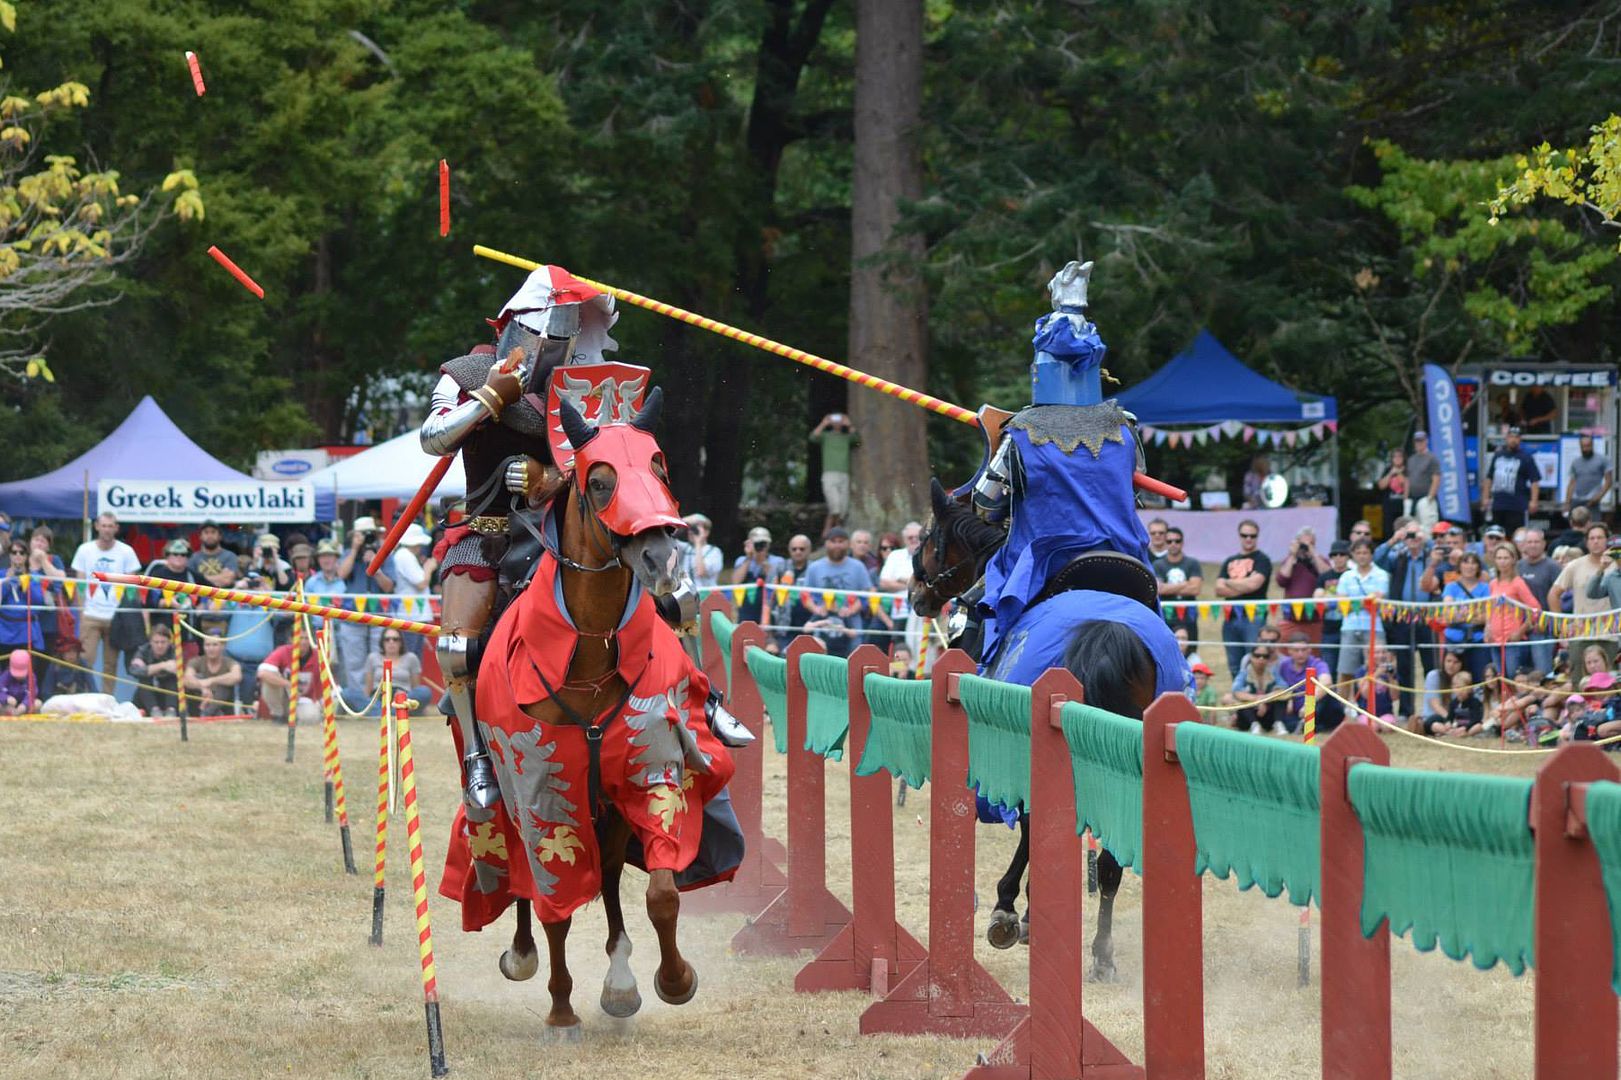 Sarah Hay(left) breaks not just the frangible tip of her lance, but the solid base of the lance all the way down to her hand in a strike against Andrew McKinnon(right) during the jousting competition at Harcourt Park 2015 (photo by Gene Alcock)